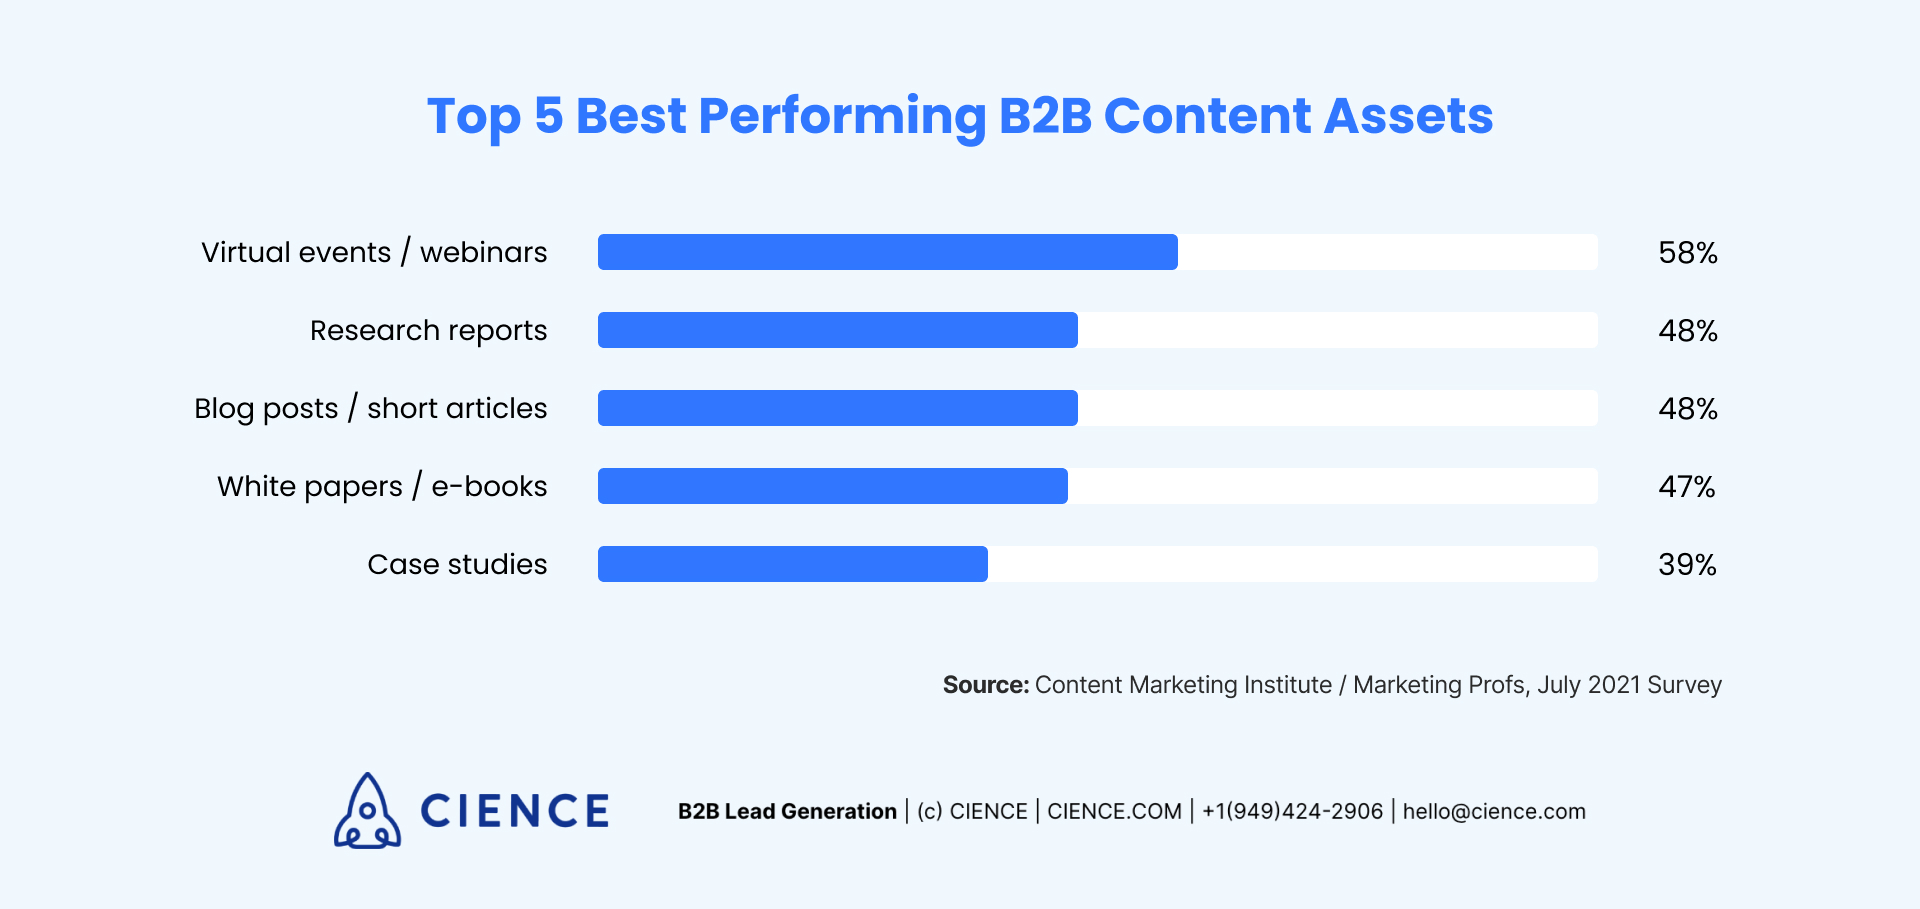 Top 5 Best Performing B2B Content Assets